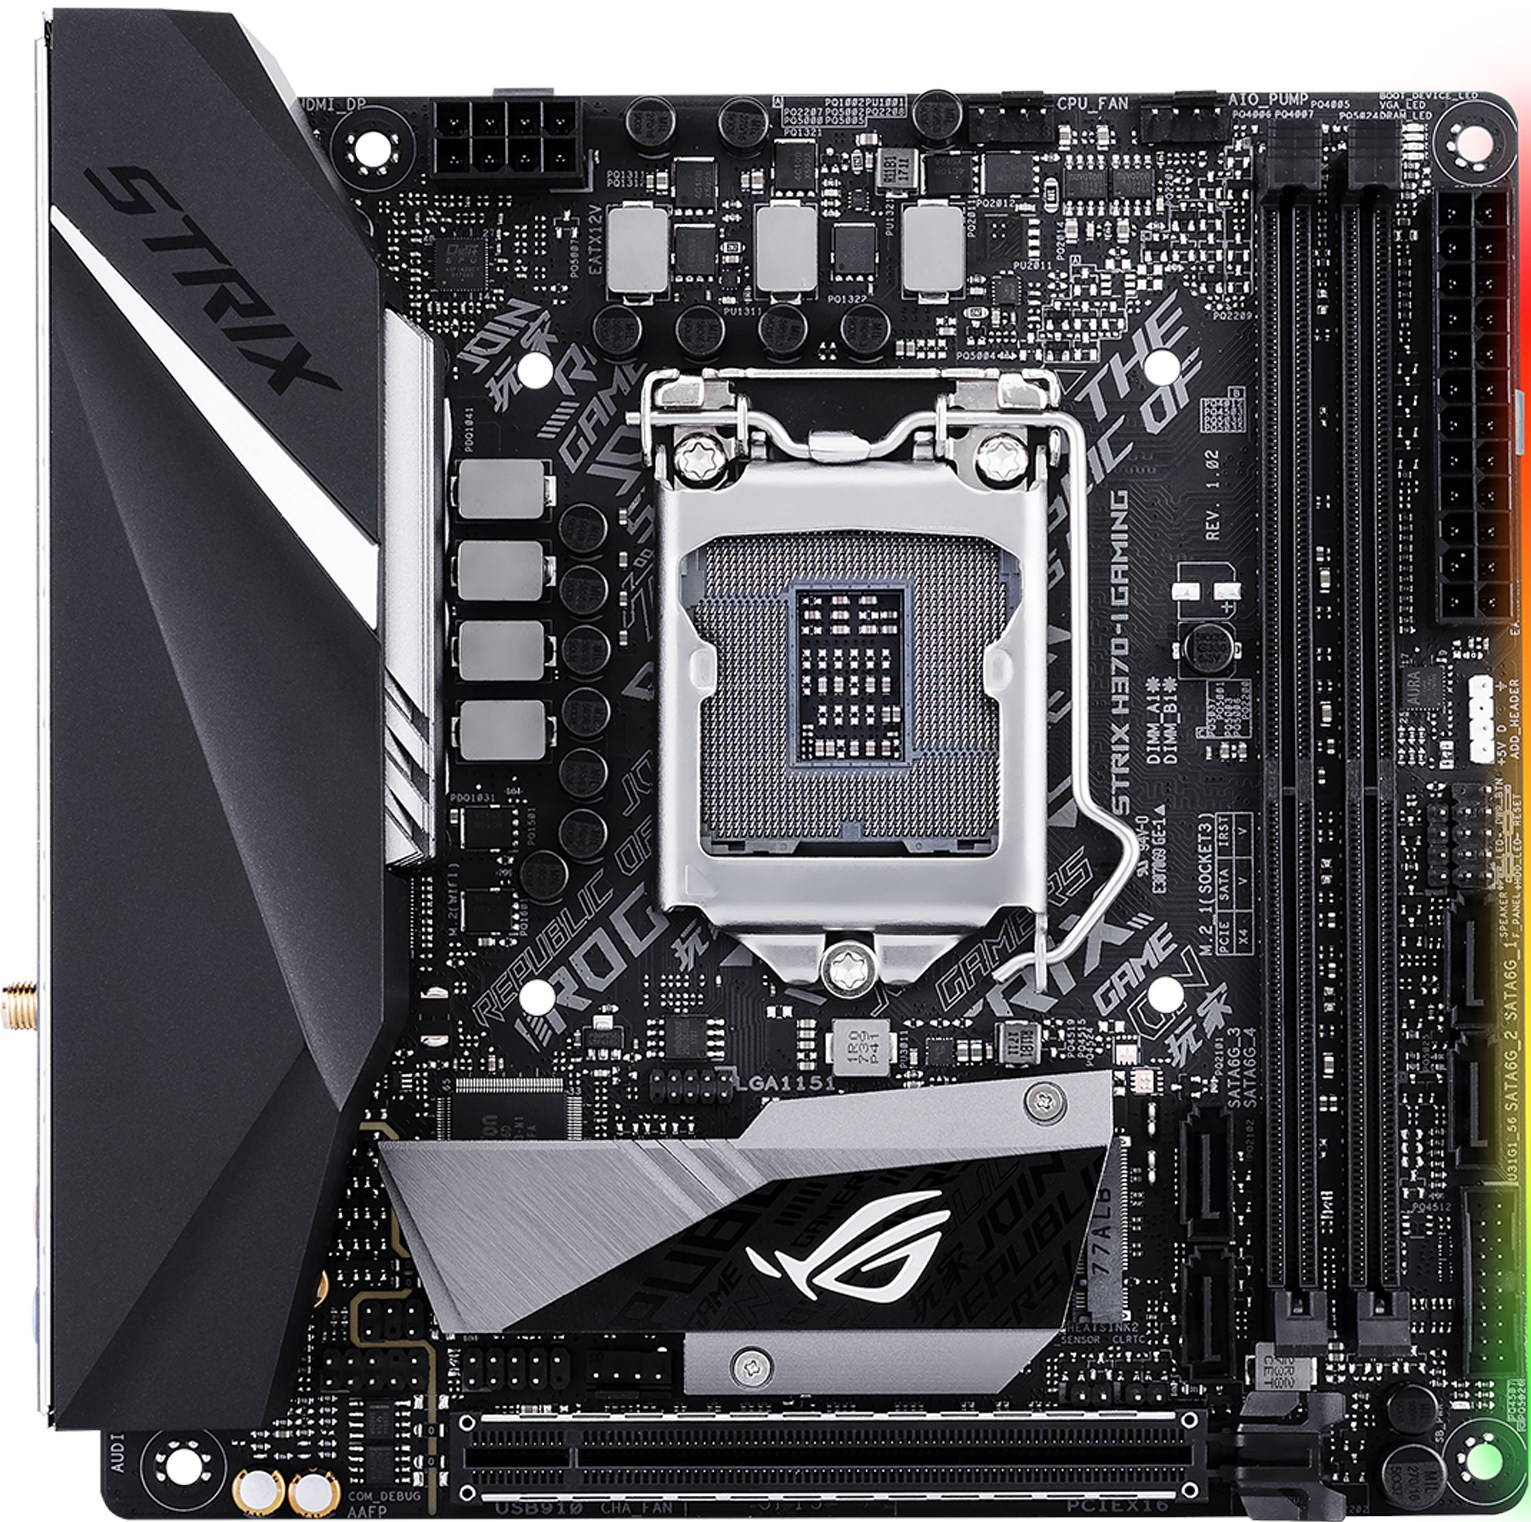 Asus ROG Strix H370-I Gaming - Motherboard Specifications On 